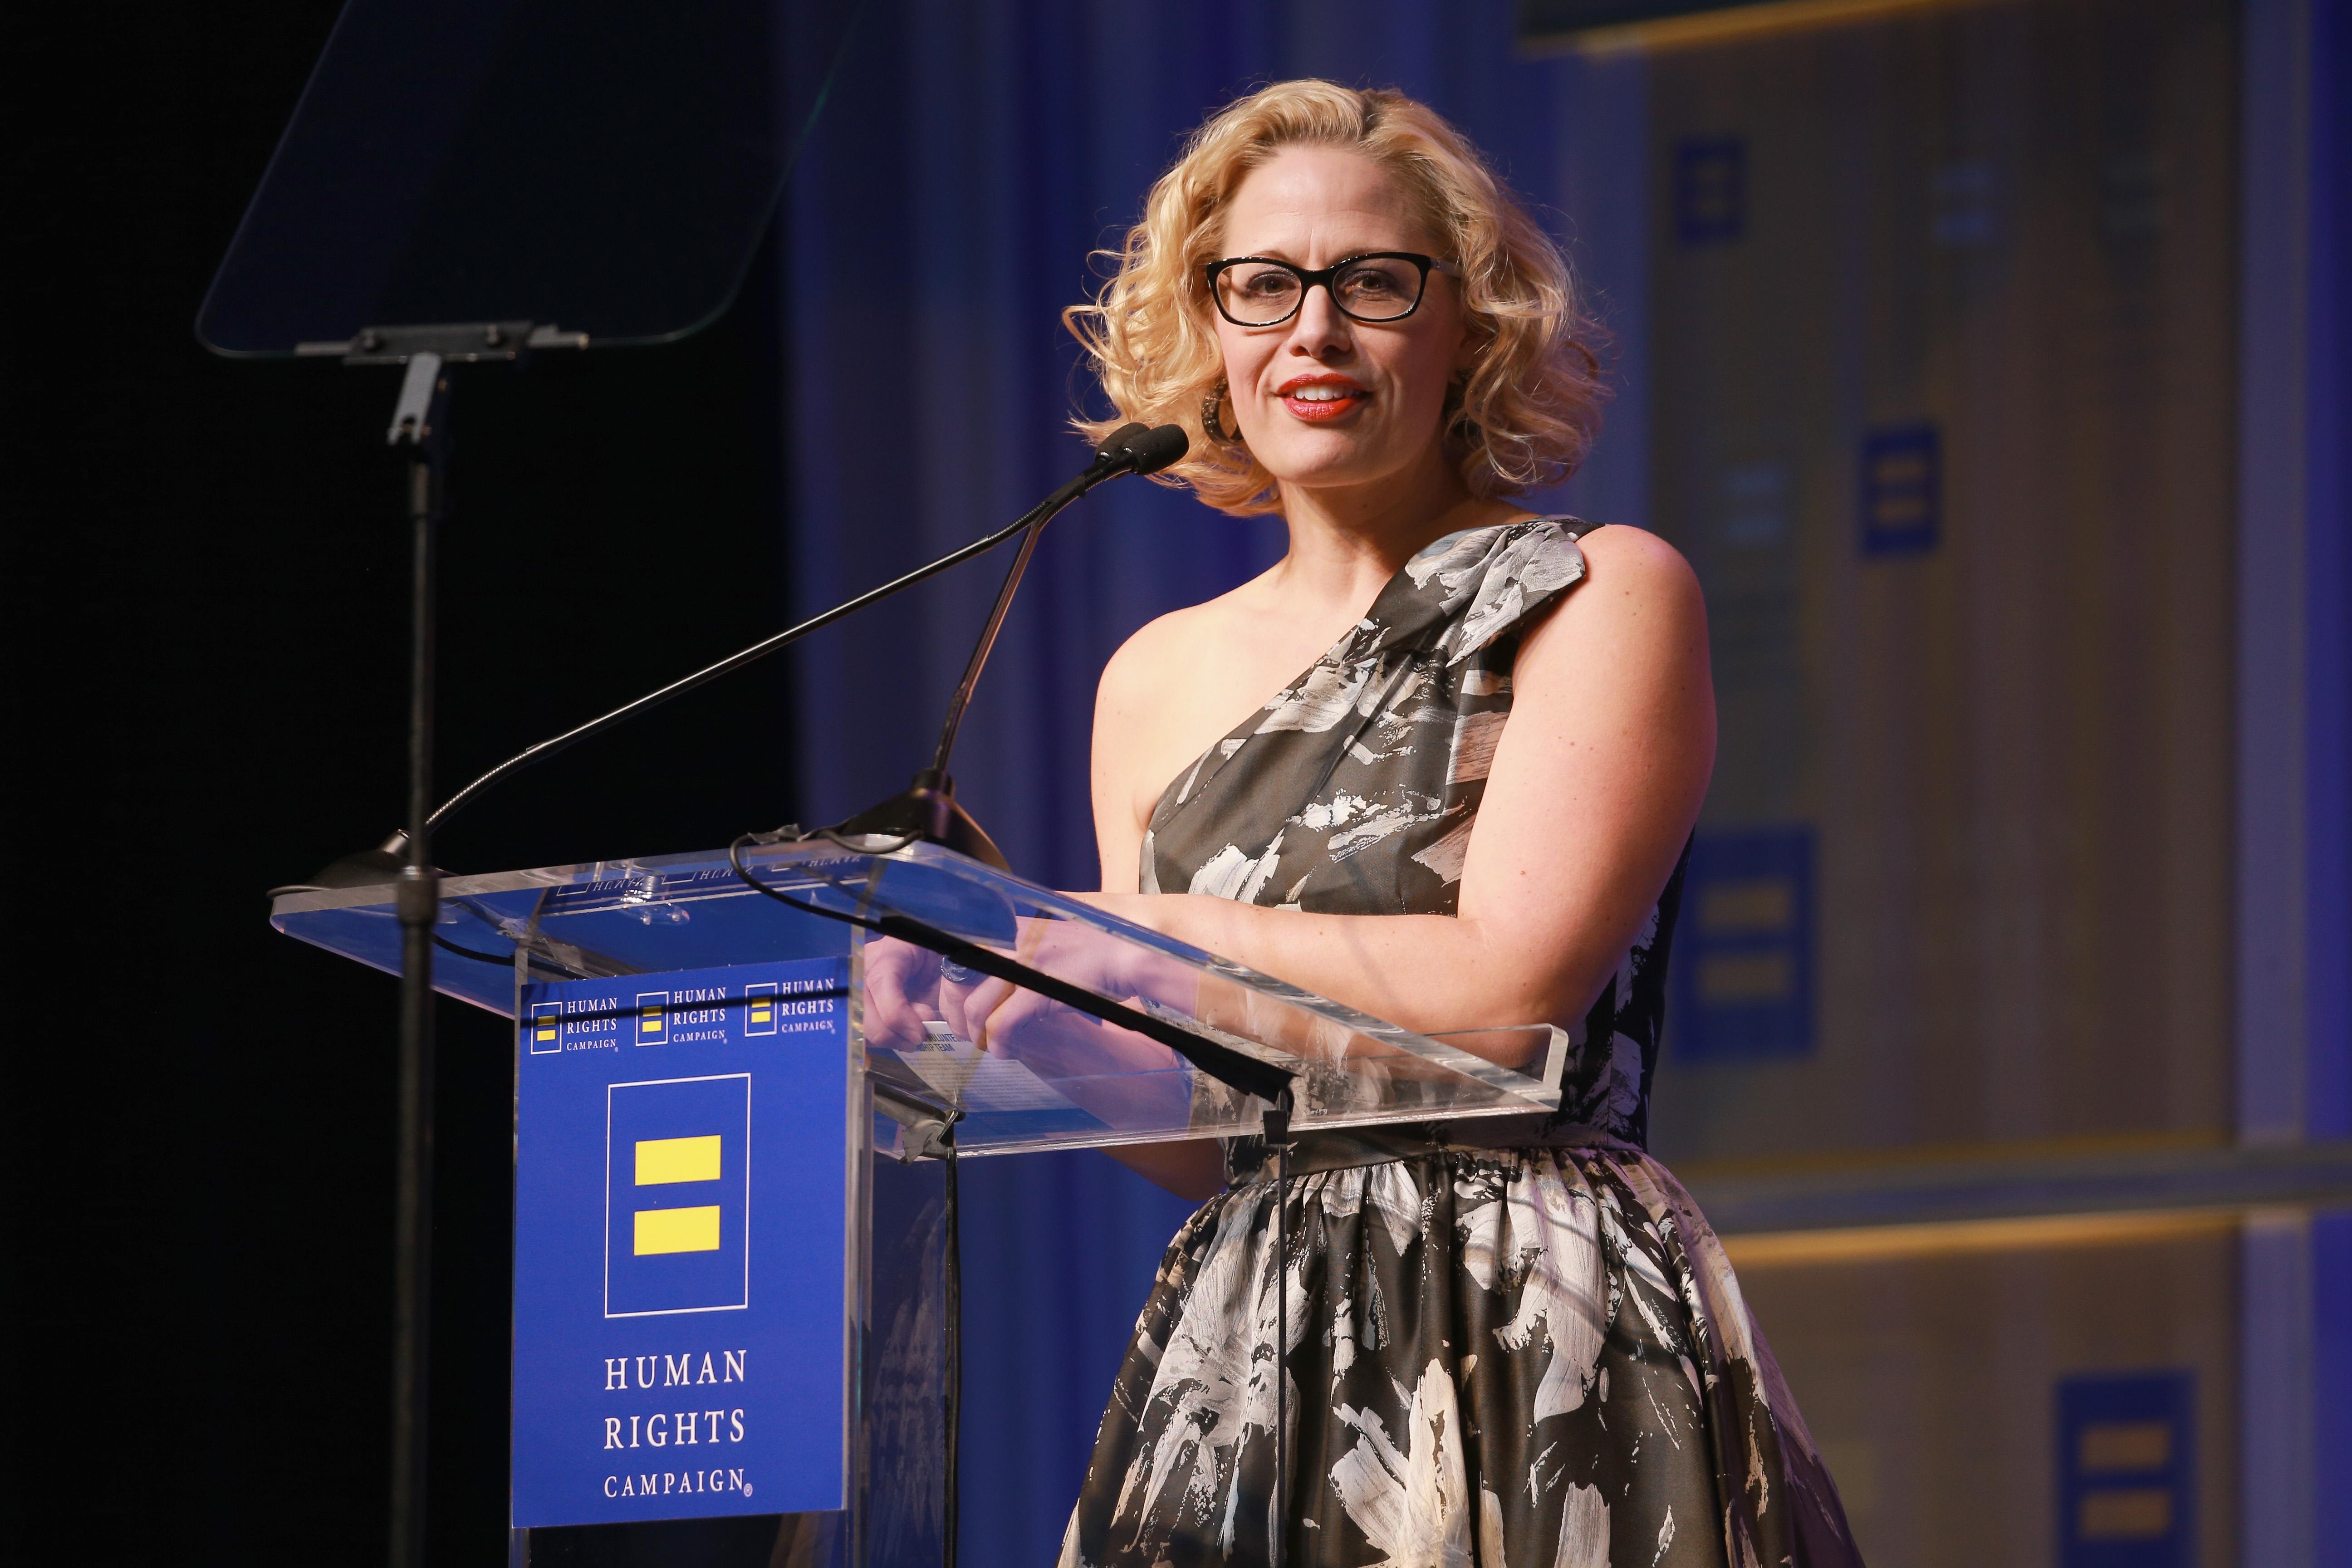 Rep. Kyrsten Sinema speaks at the Human Rights Campaign 2018 gala in Los Angeles.